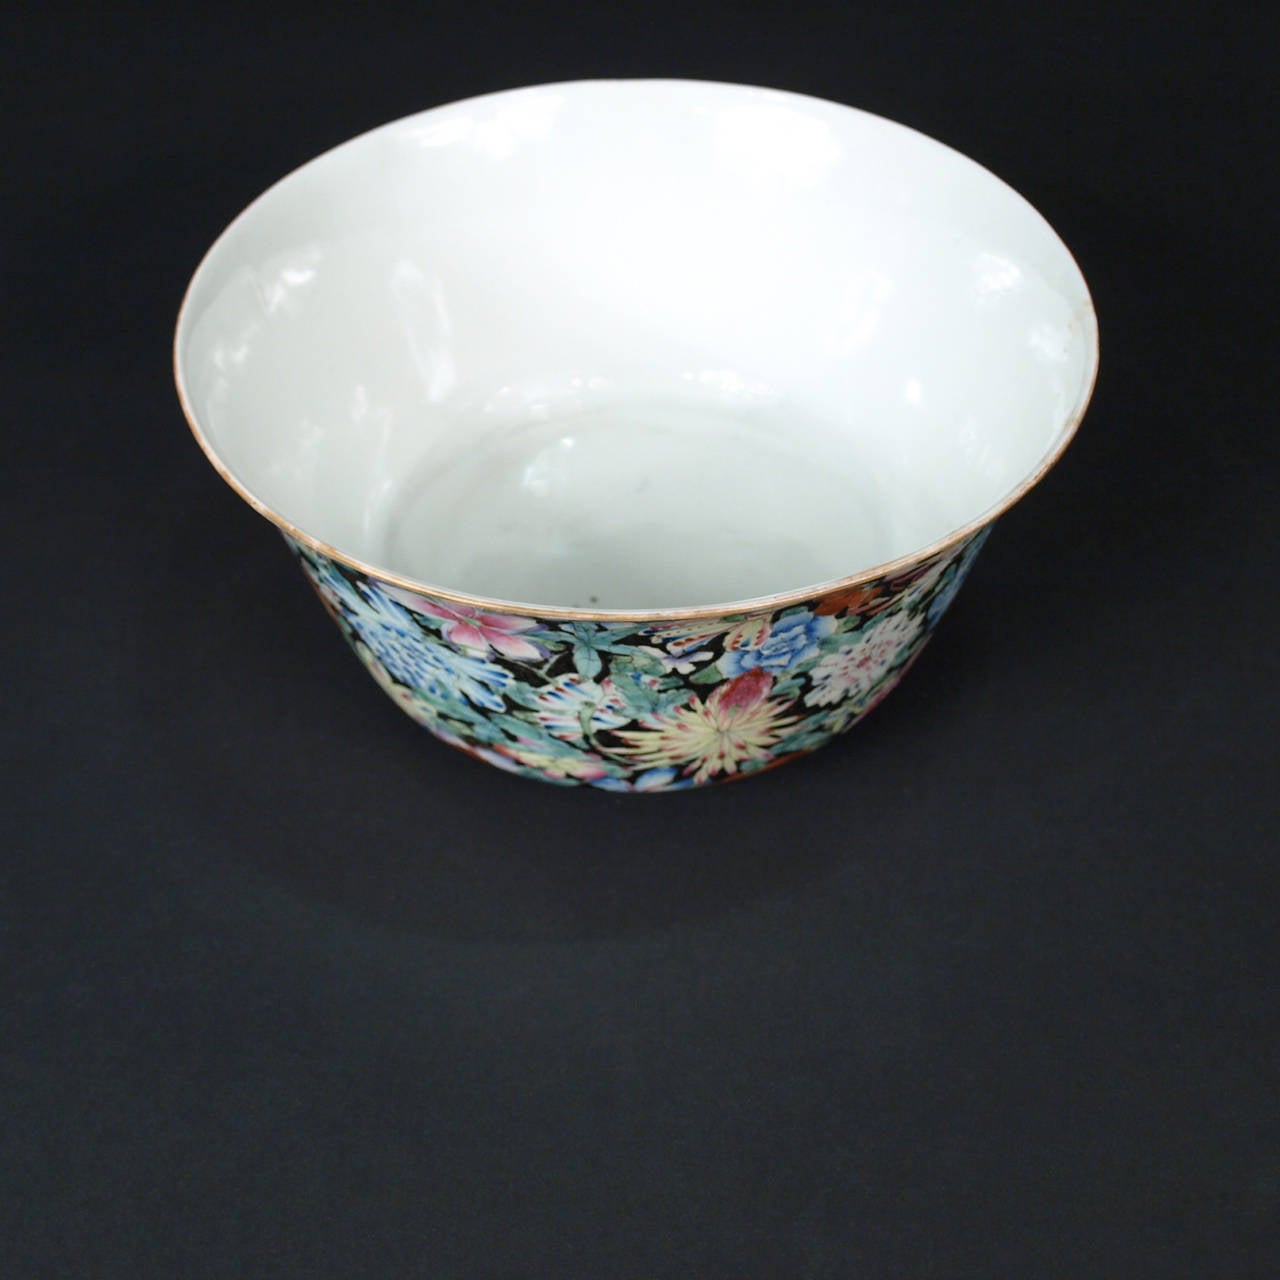 Beautifull Chinese porcelain bowl decorated in Black millefiori patern.
Qianlong mark but late 19th century.